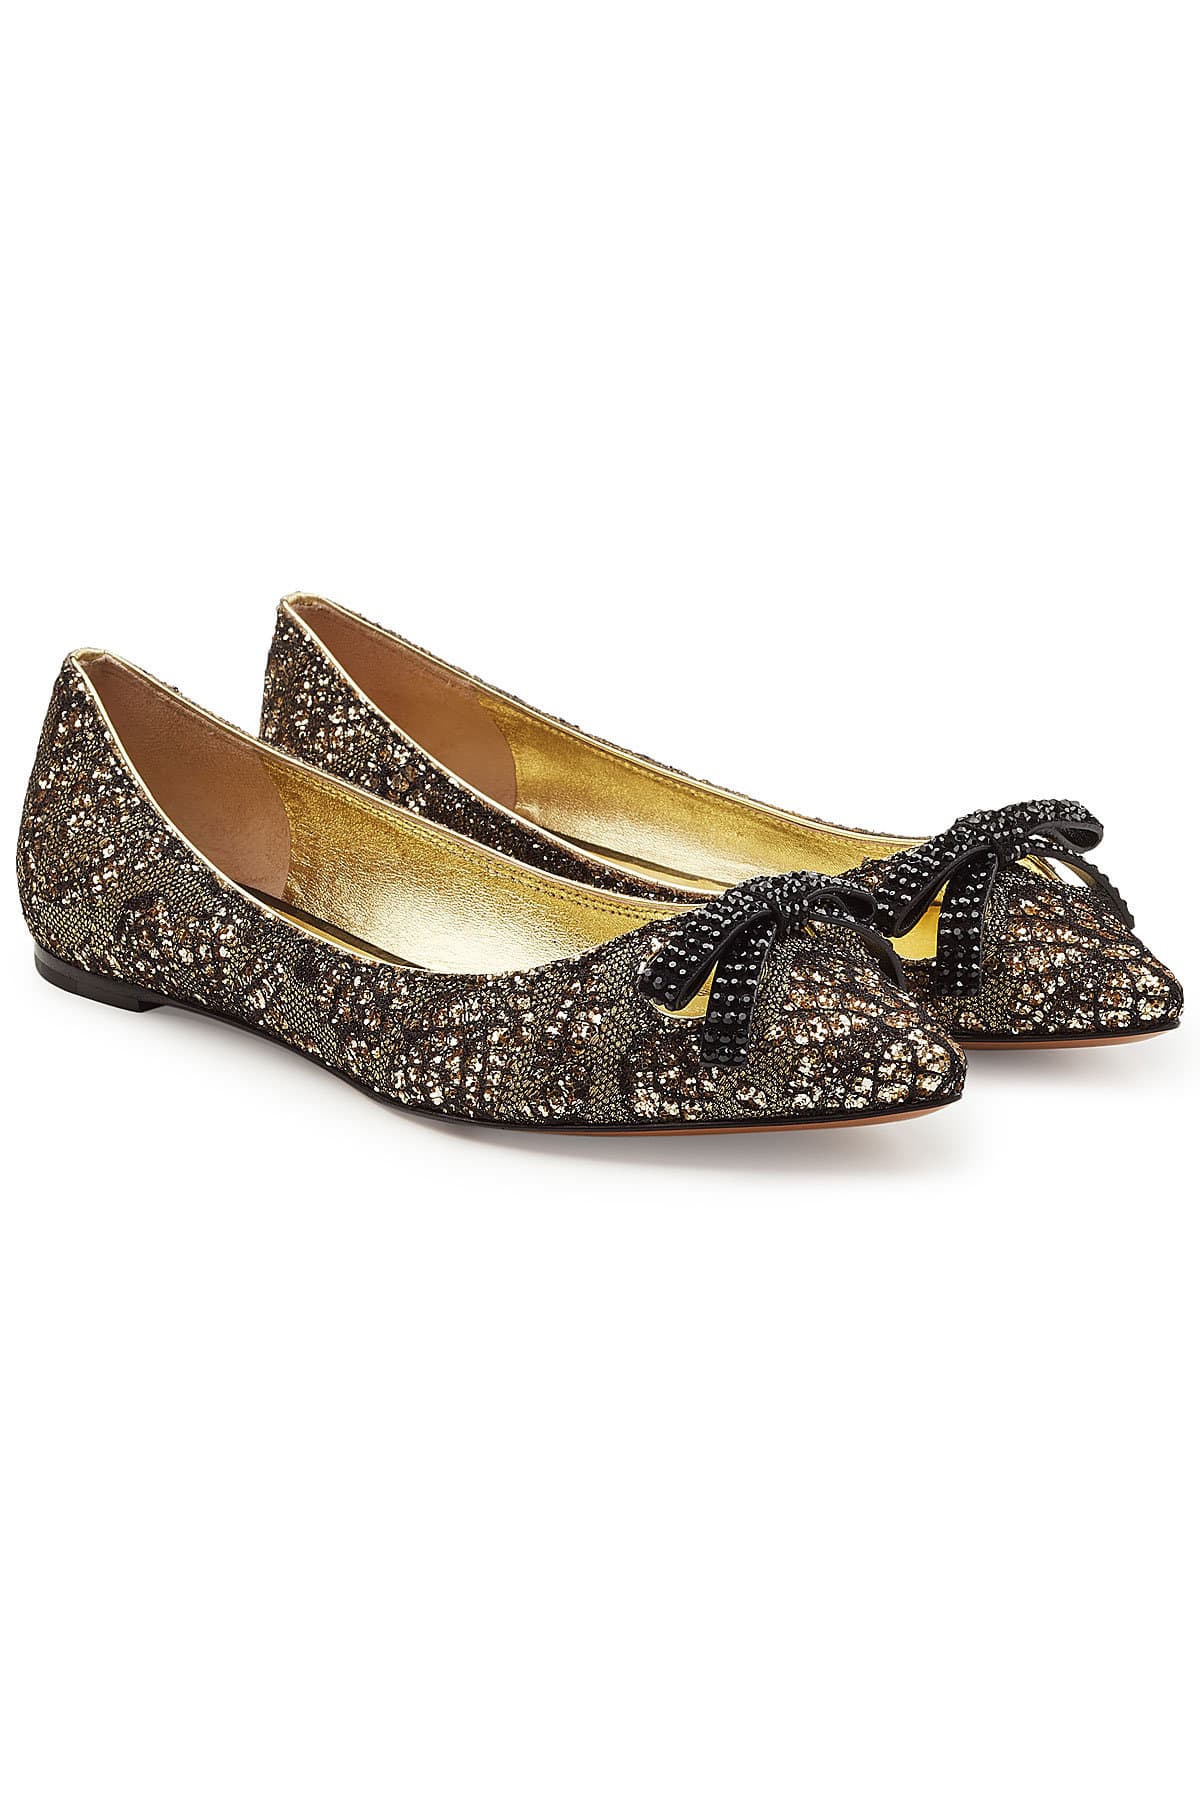 Ornate Ballet Flats by Marc Jacobs